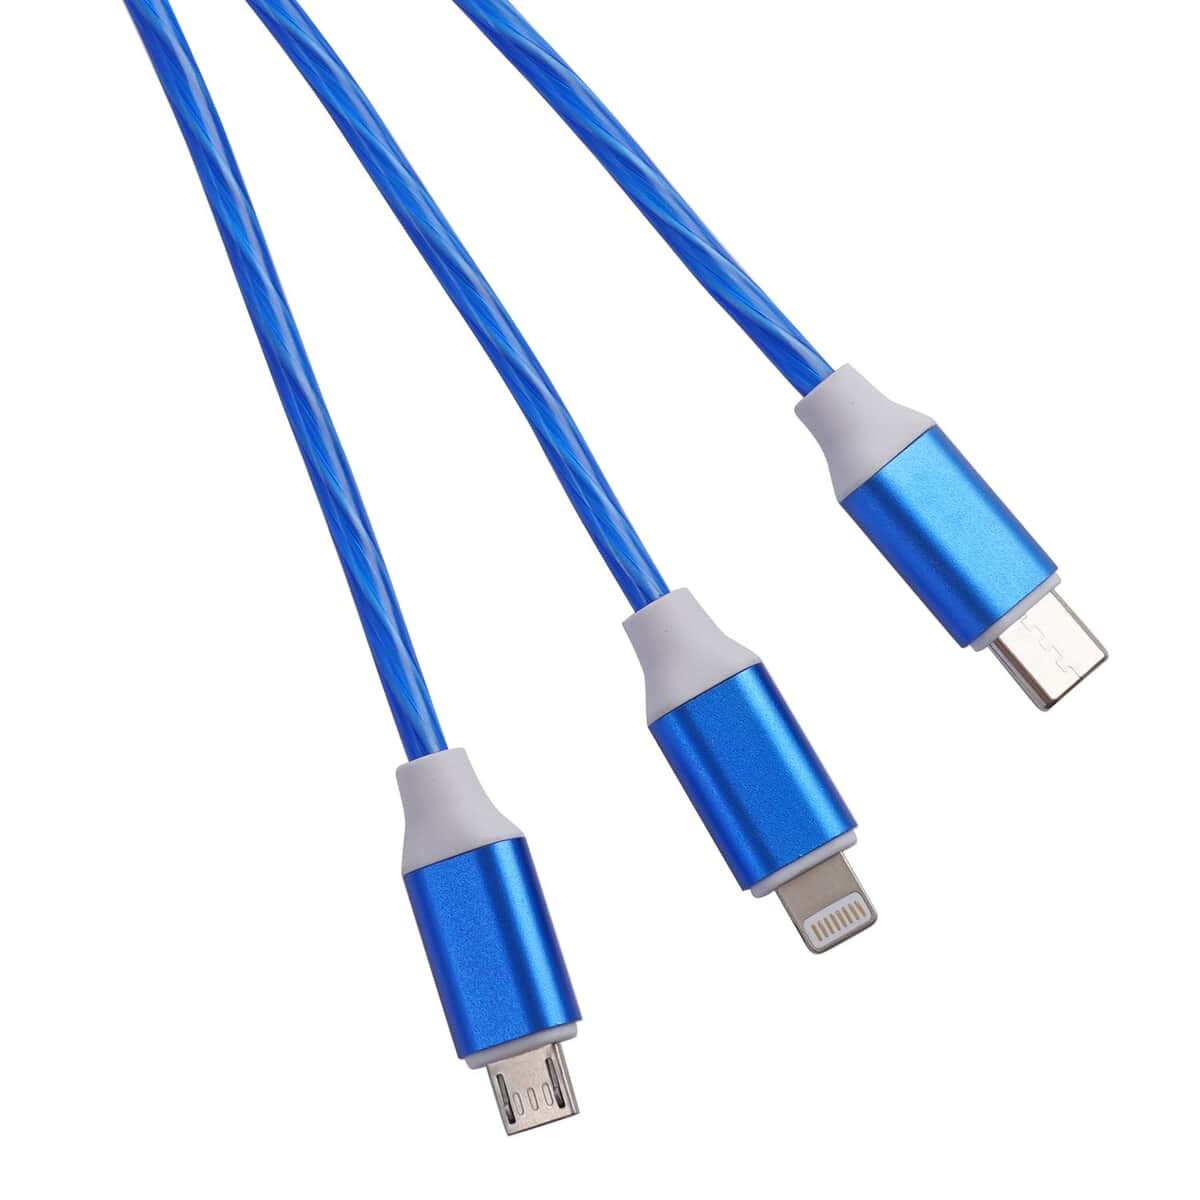 2pcs Set 3 in 1 Light Moving Charging Cable - Blue (47.24") image number 3